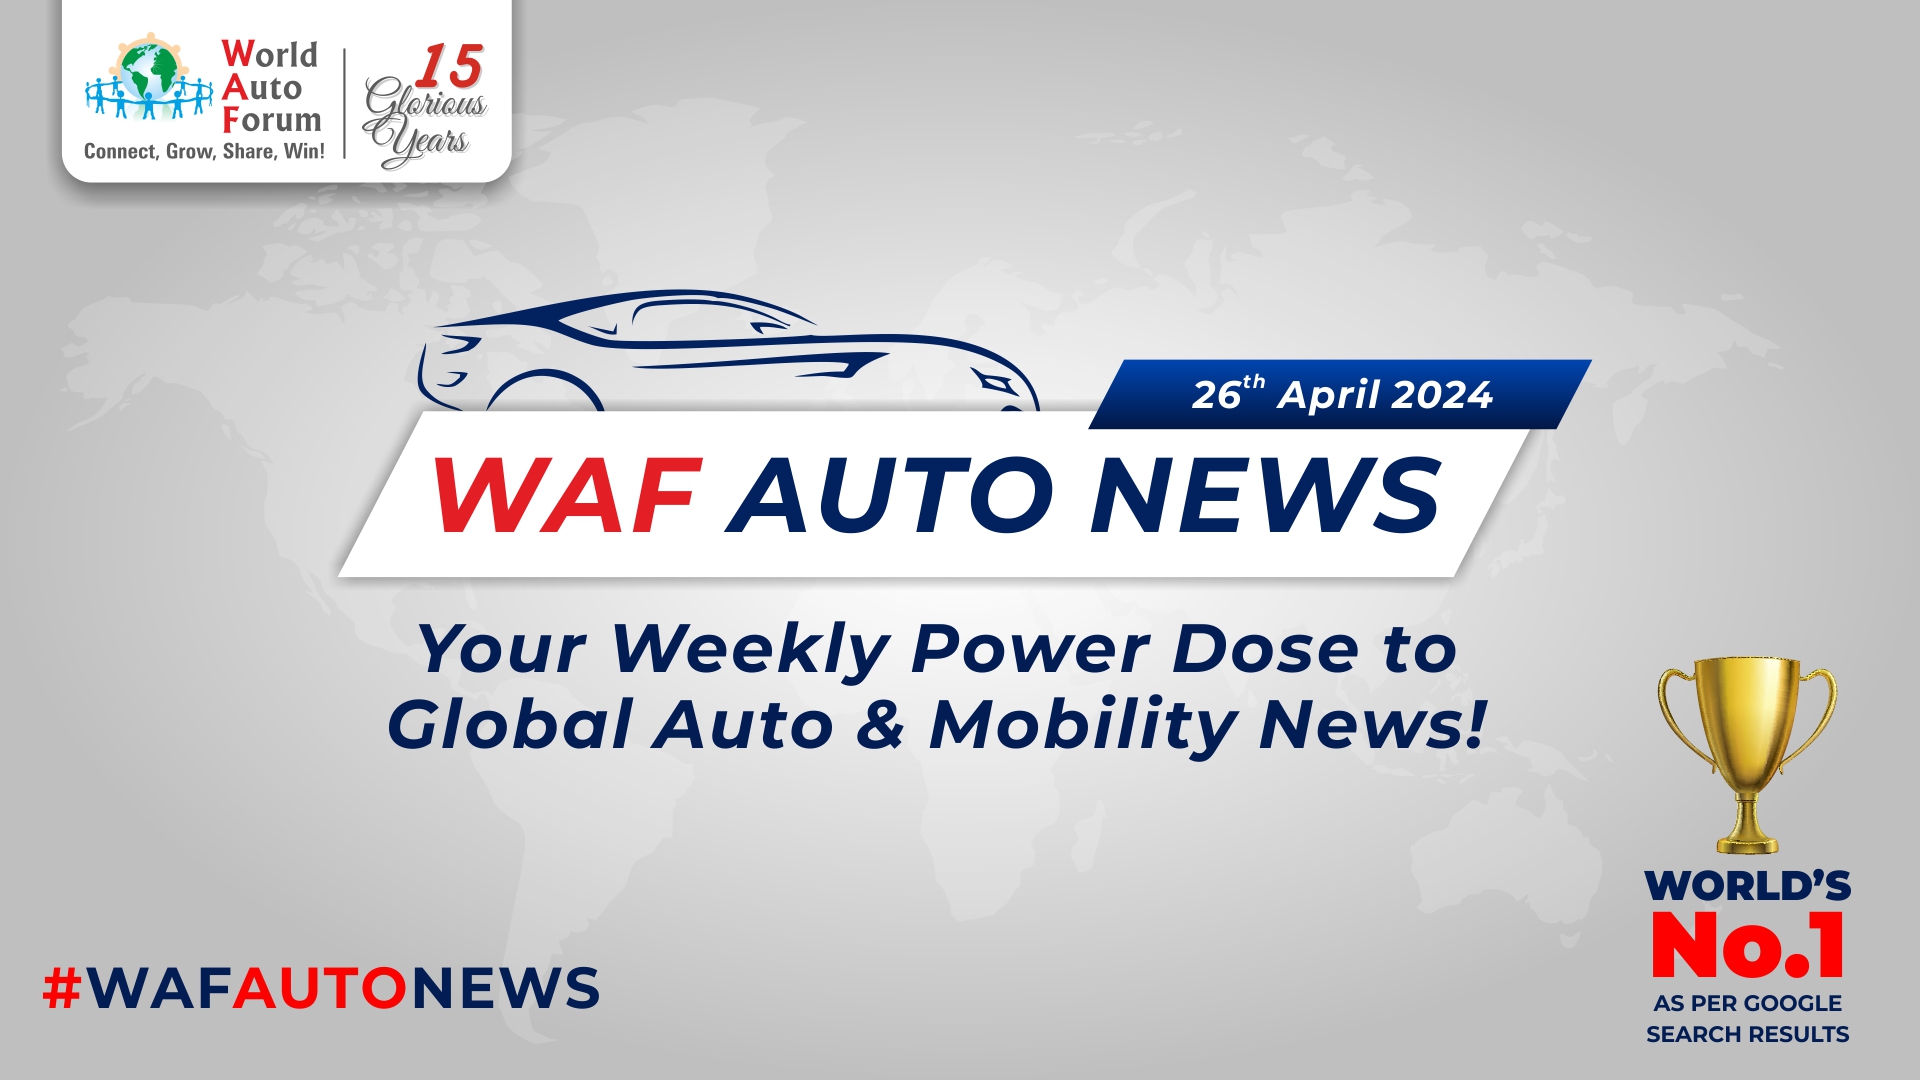 WAF Auto News | The Auto World This Week (26th April 2024) | World Auto Forum